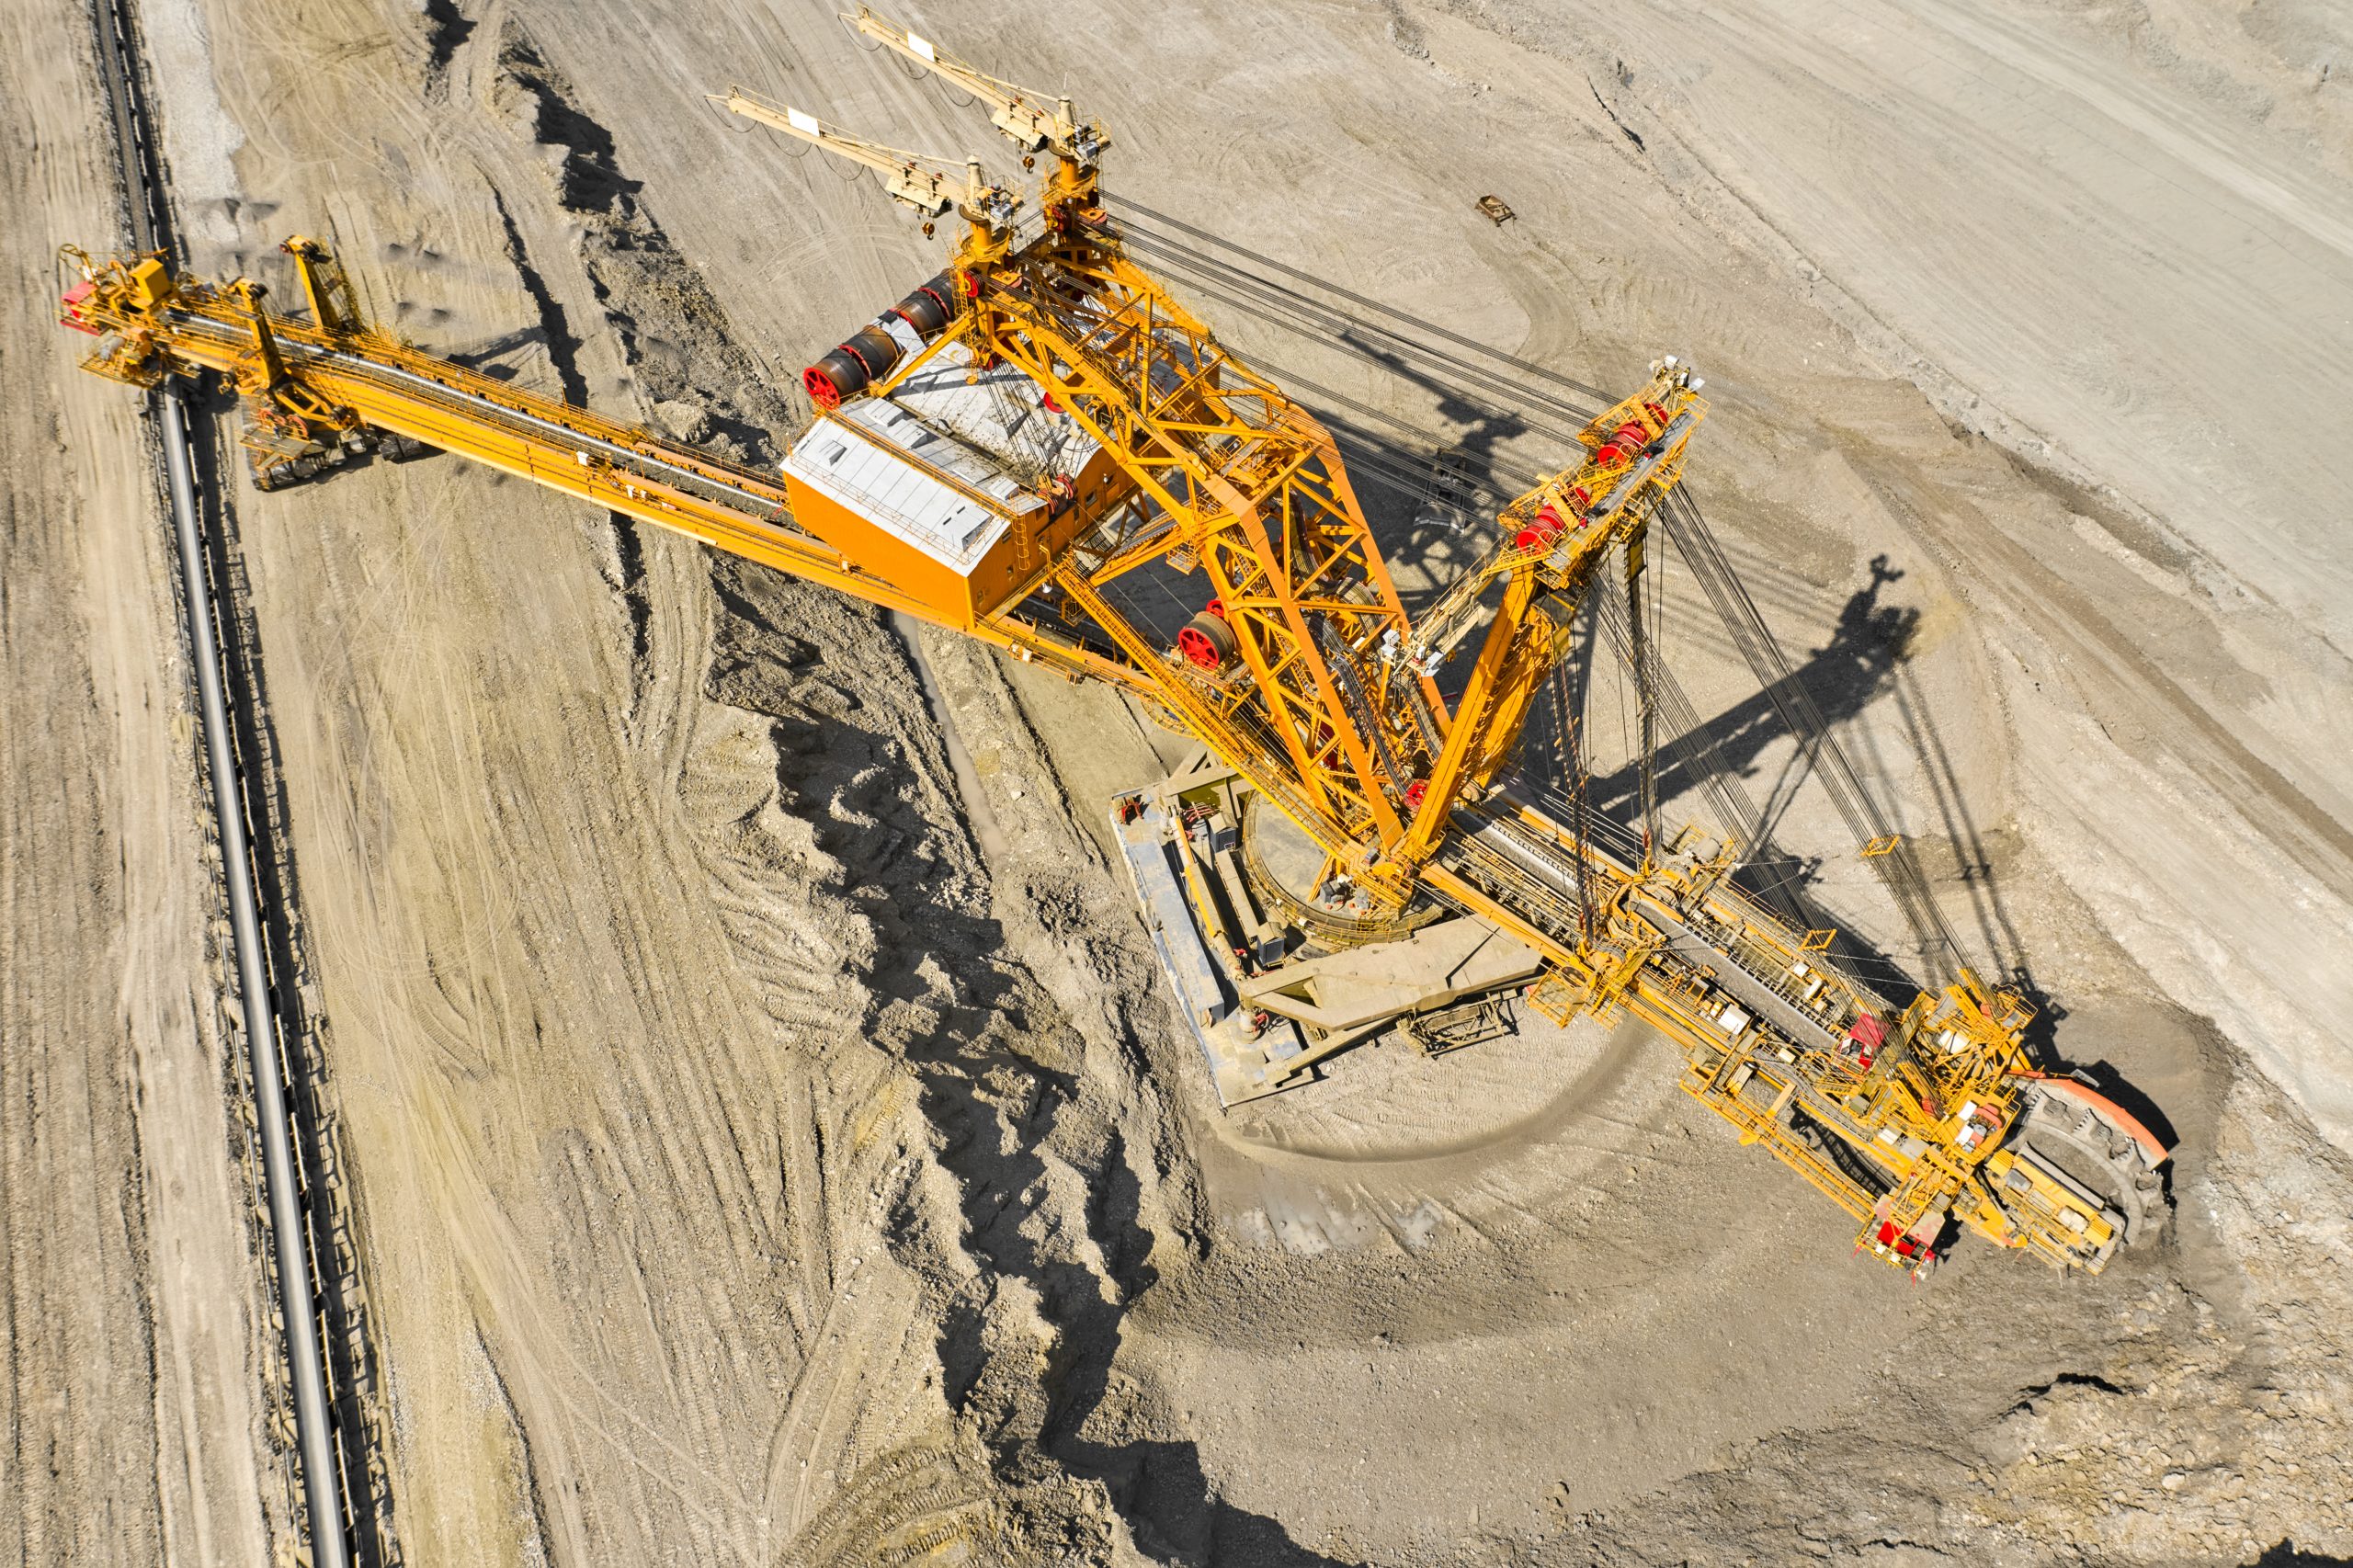 Top view of a bucket wheel excavator mining coal in an open pit mine.